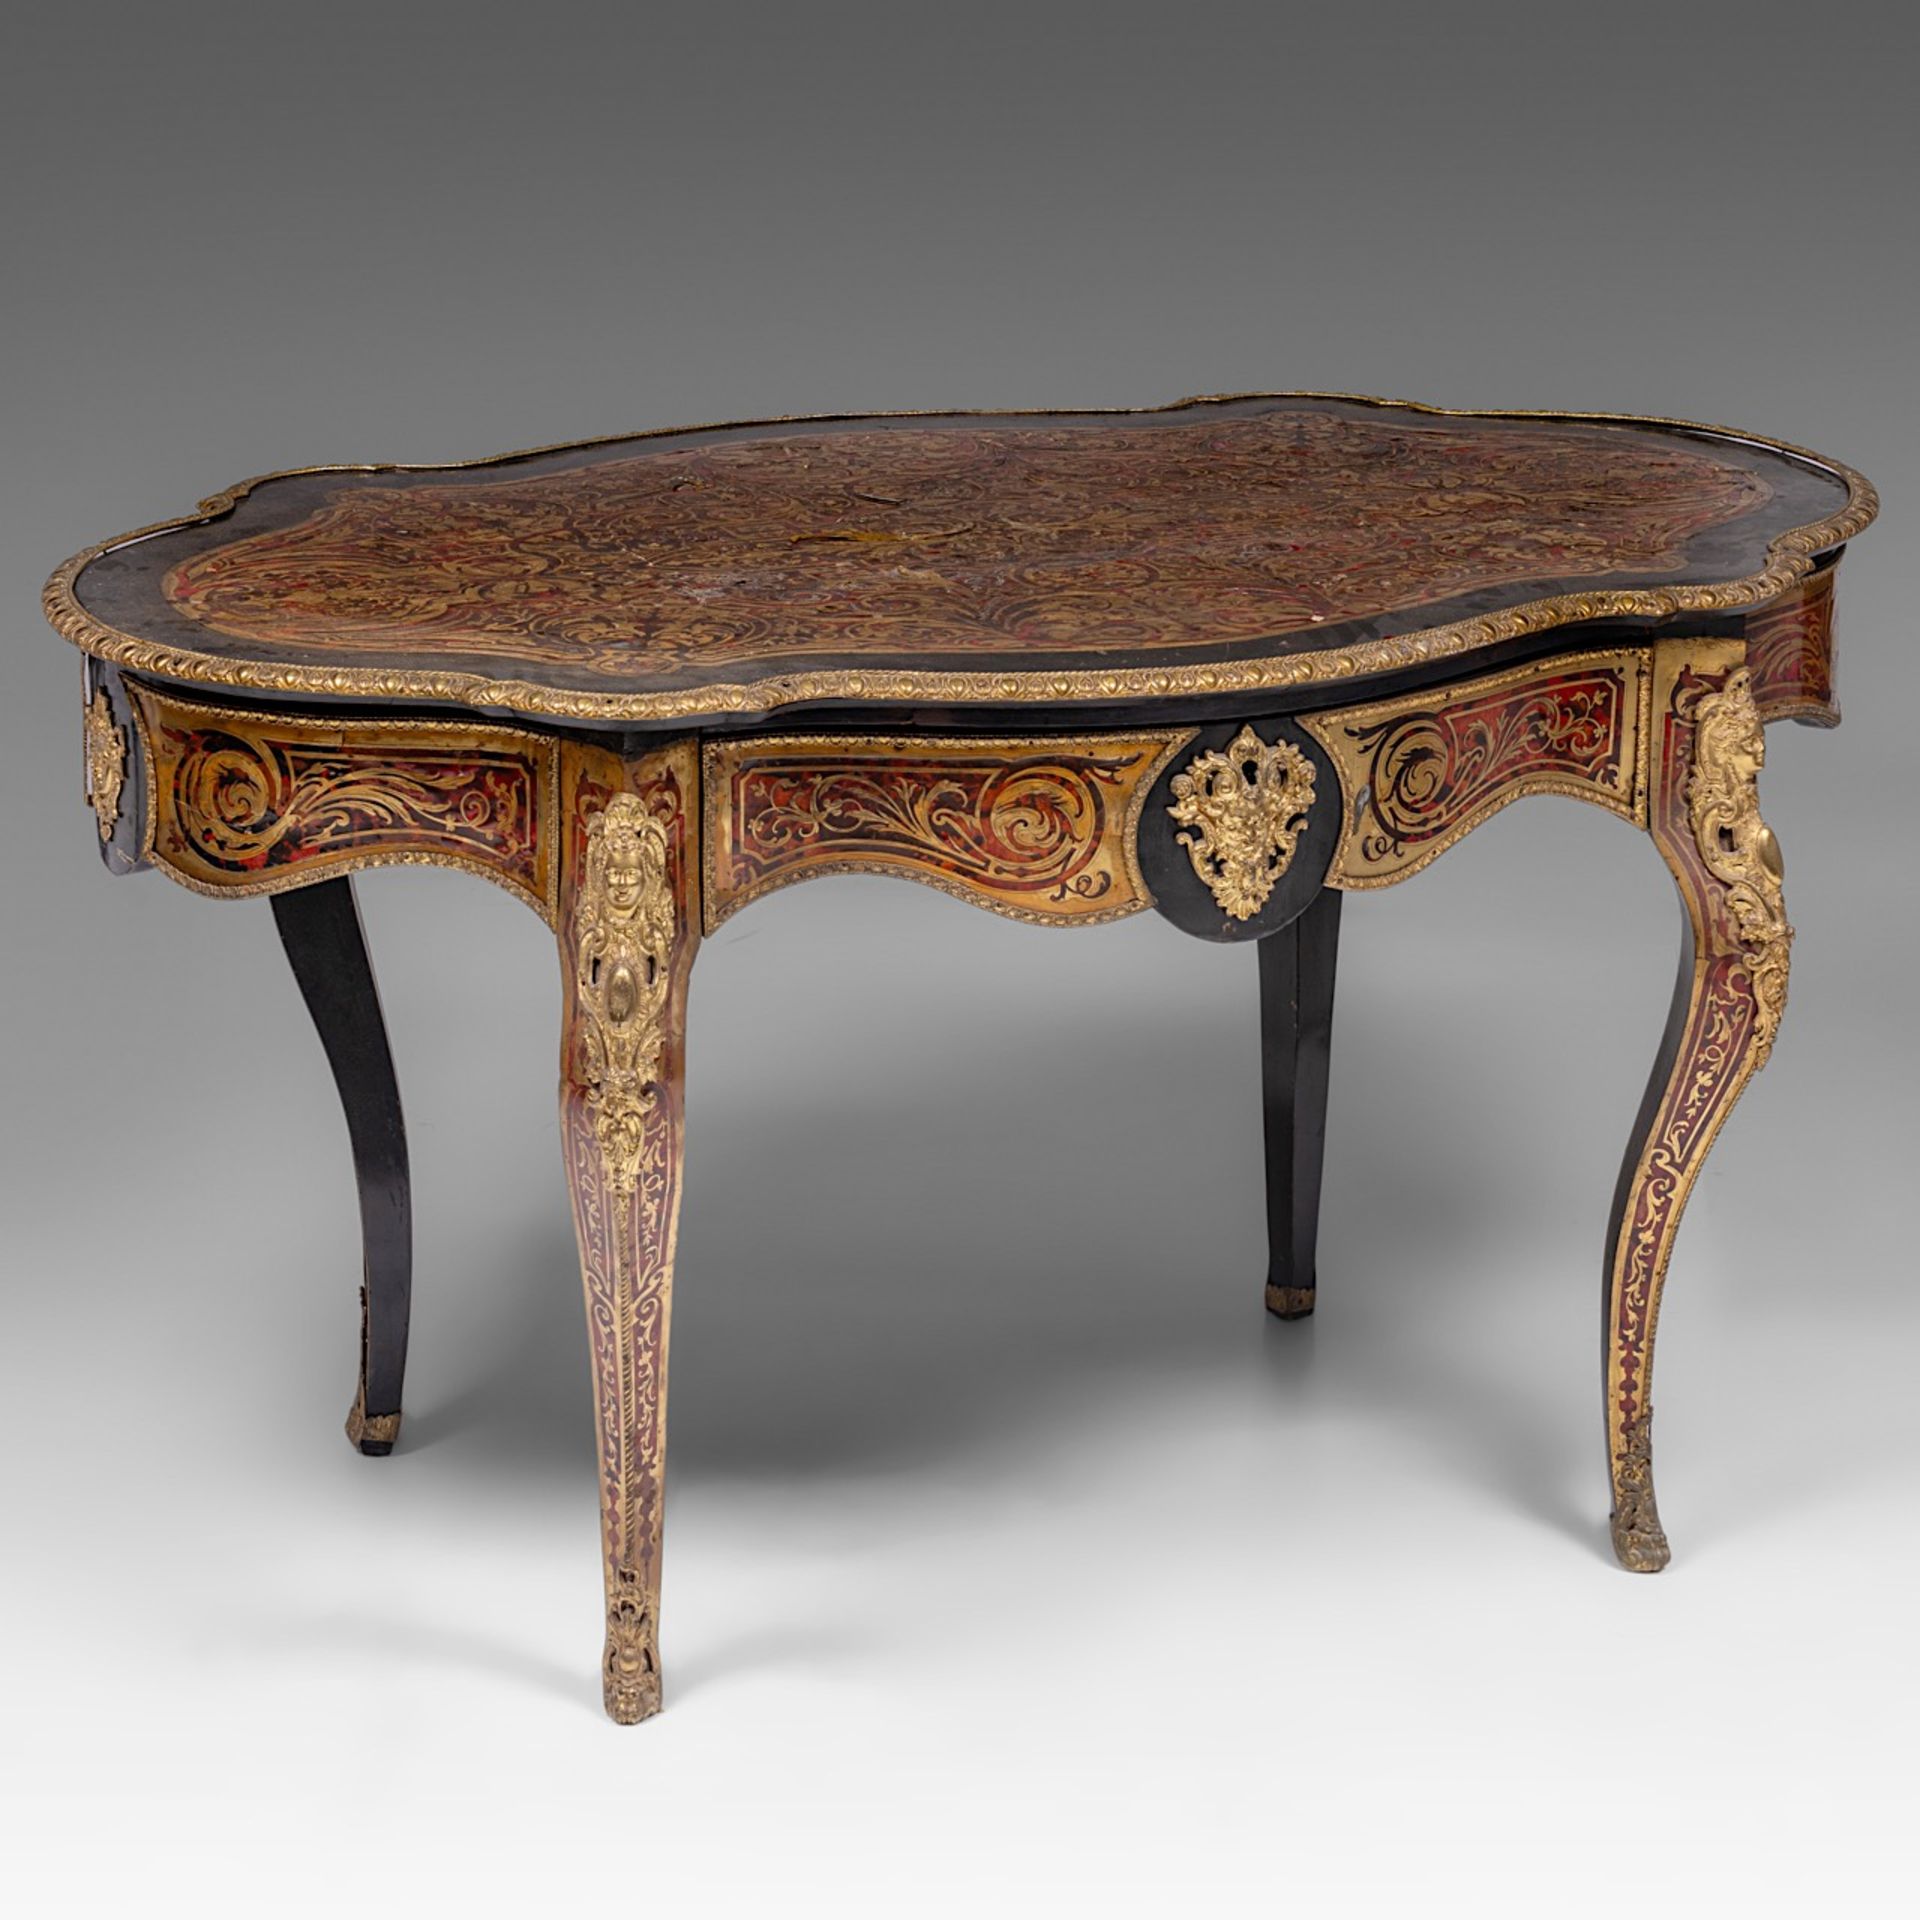 A Napoleon III Boulle work centre table with gilt bronze mounts, late 19thC, H 79 - W 146 - D 90 cm - Image 12 of 12